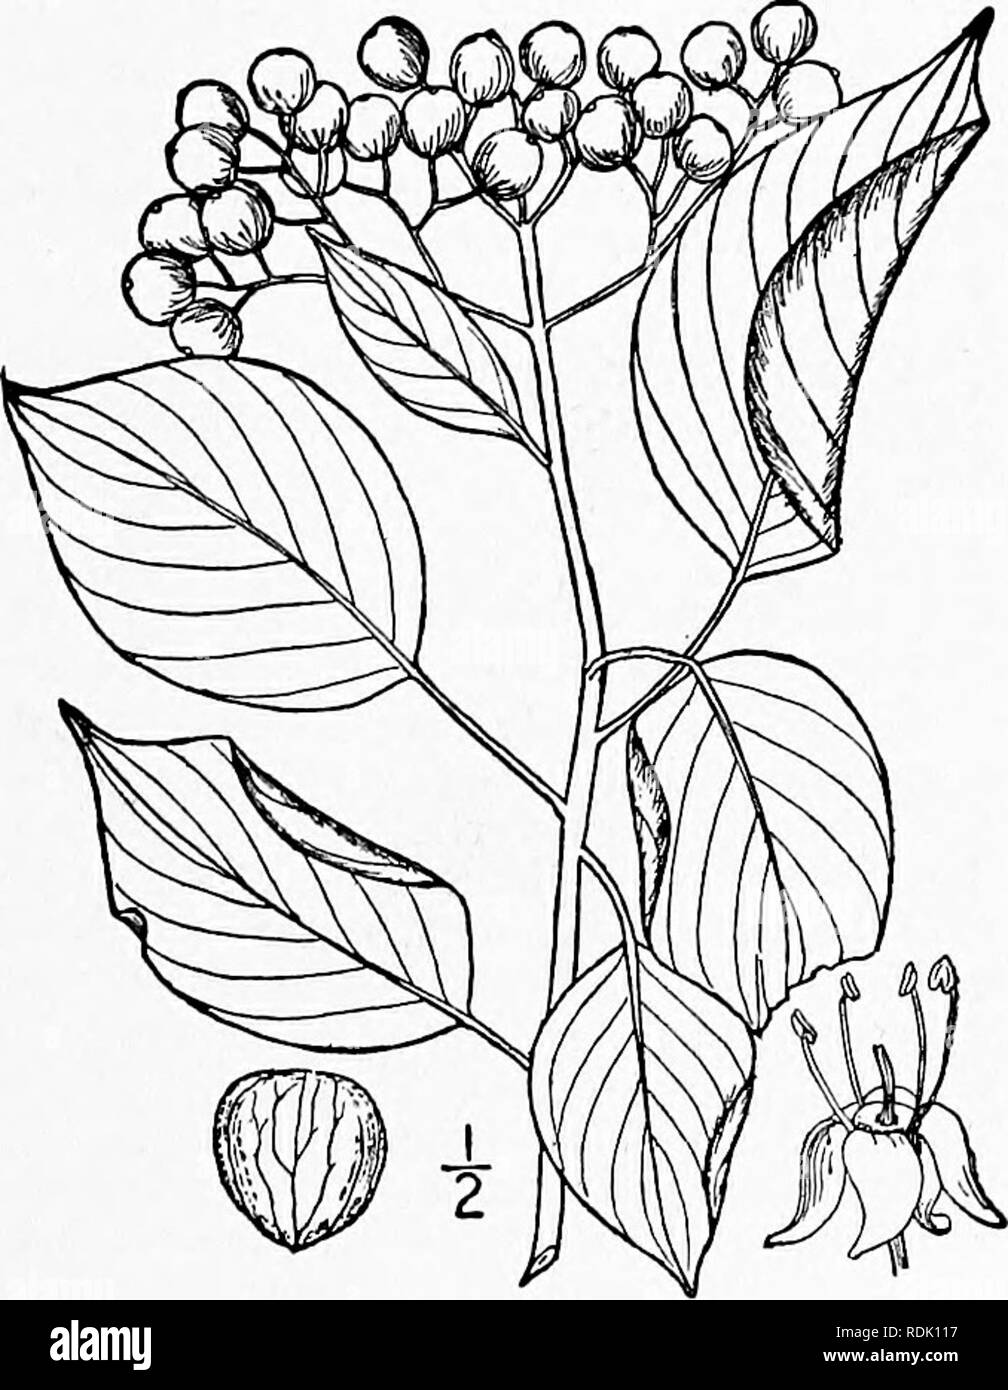 . An illustrated flora of the northern United States, Canada and the British possessions, from Newfoundland to the parallel of the southern boundary of Virginia, and from the Atlantic Ocean westward to the 102d meridian. Botany; Botany. 8. Cornus stricta Lam. Stiff Cornel or Dogwood. Fig. 3187. Cornus striata Lam. Encycl. 2: 116. 1786, C. fastigiata Michx. Fl. Bor. Am. i: 92. 1803. A shrub, 8°-iS° high, resembling the pre- ceding species, the twigs purplish or reddish brown. Leaves petioled, ovate or ovate-lanceo- late, acute or acuminate at the apex, narrowed or sometimes rounded at the base, Stock Photo